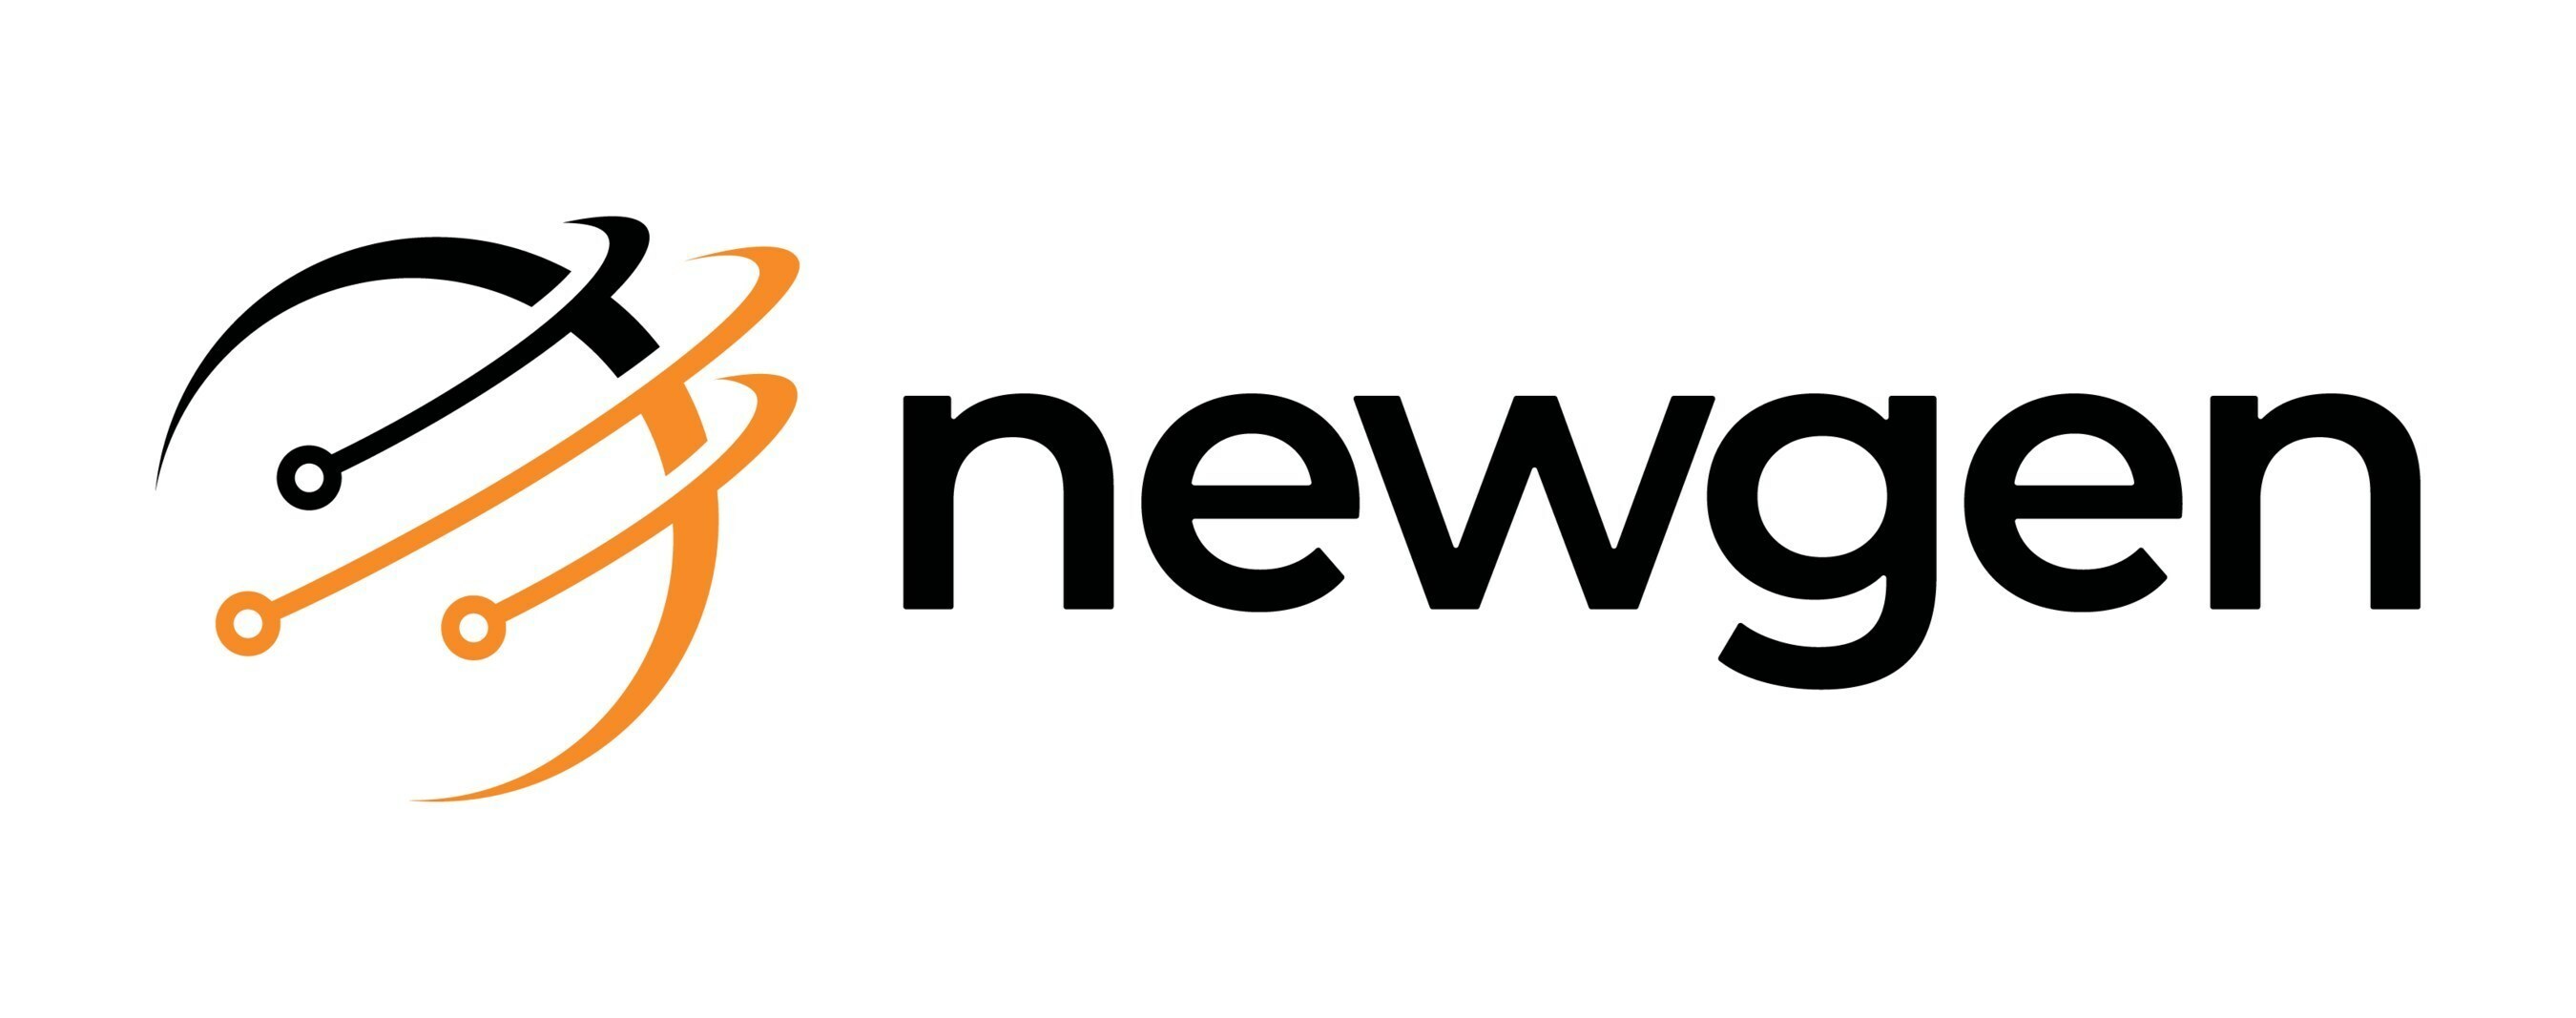 Newgen Recognized in an Analyst Report on Accounts Payable Invoice Automation